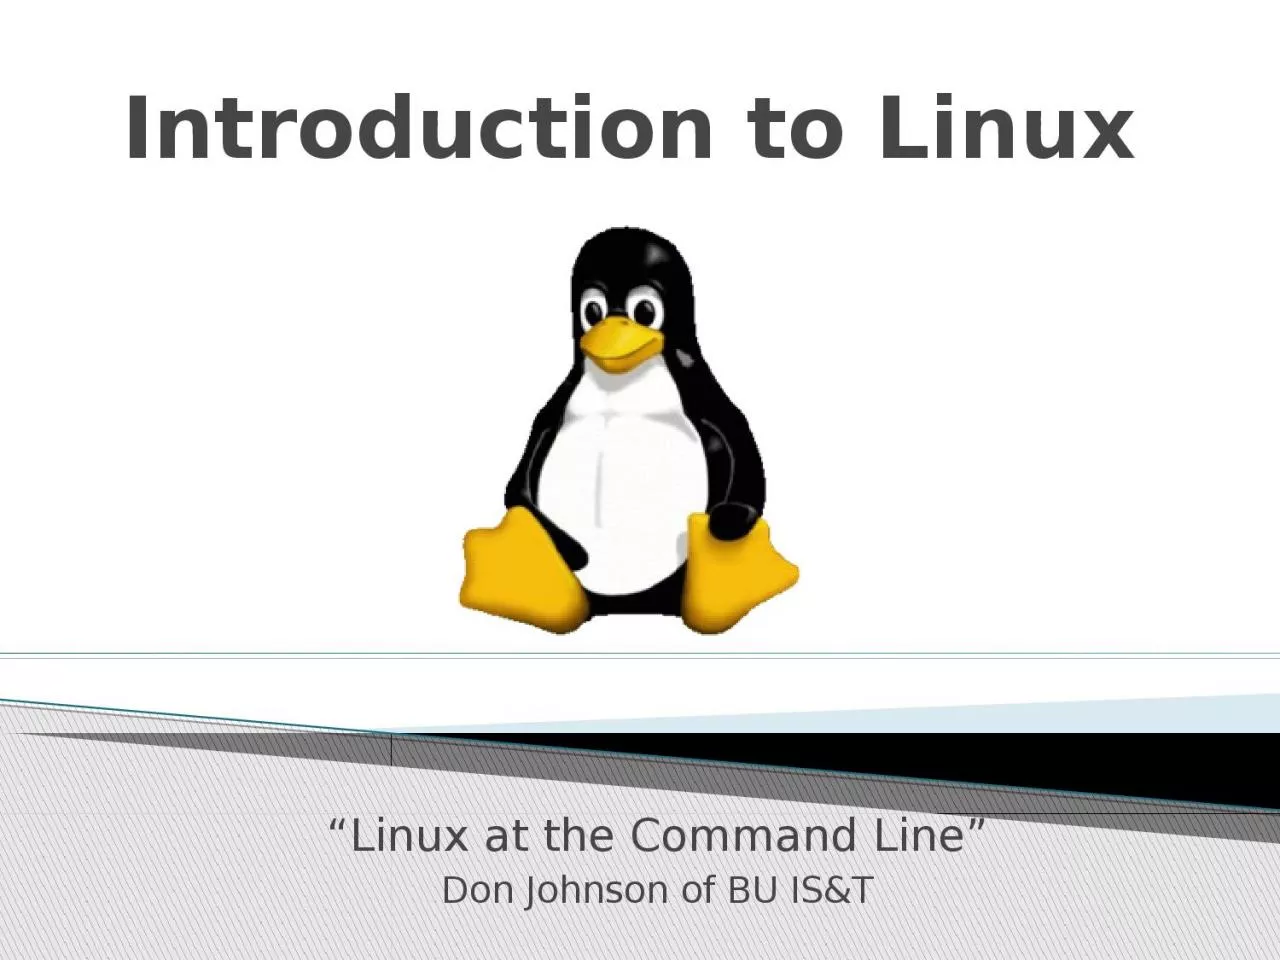 Introduction to Linux “Linux at the Command Line”